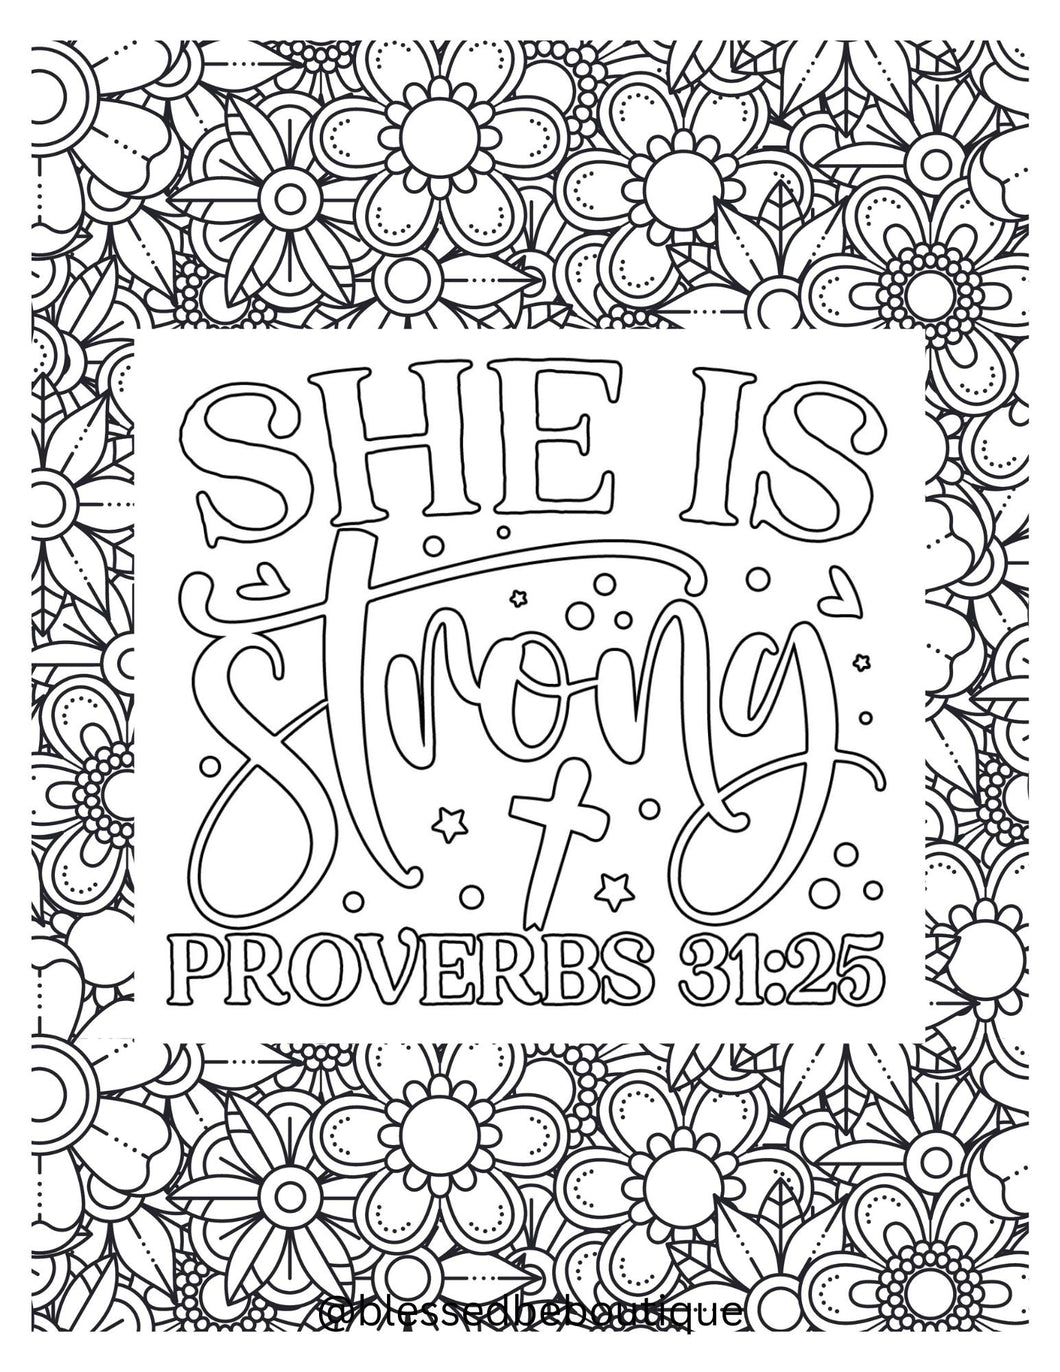 She is Strong - Blessed Be Boutique